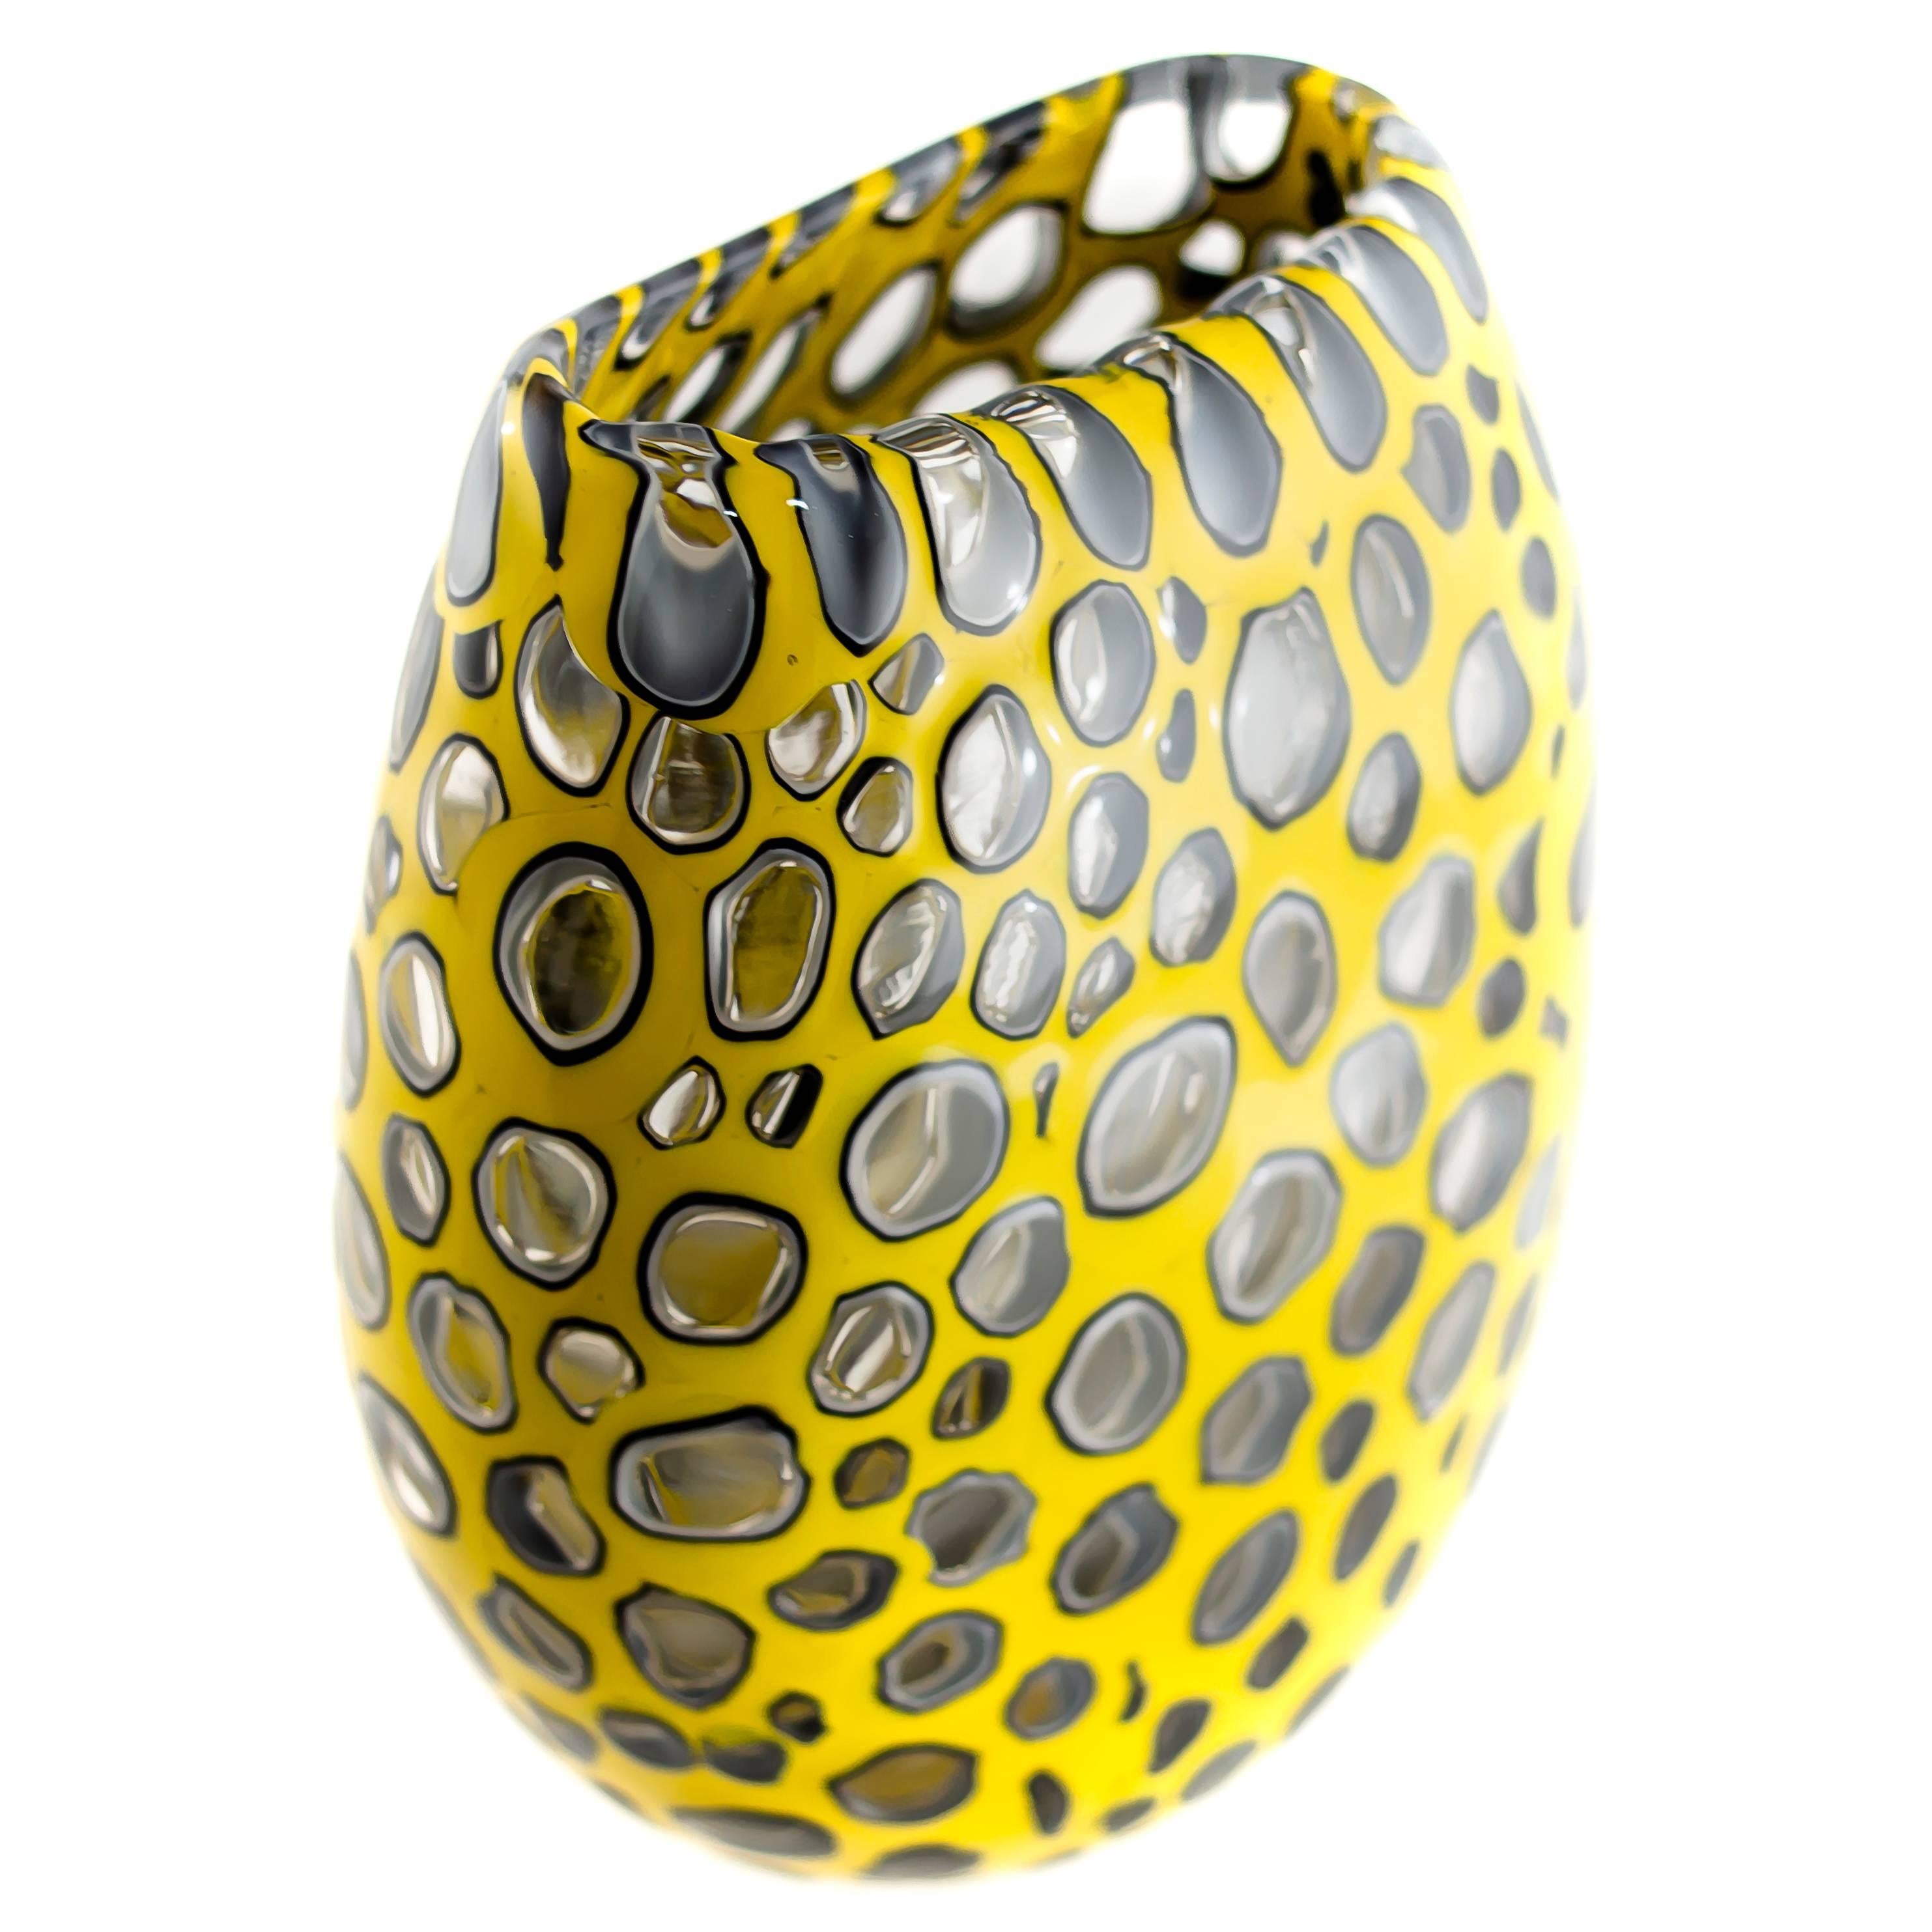 Meteor Murrine cheetah U-vase
Originally inspired by cellular patterning, these works of art have morphed into forms with an intergalactic quality. Murrine made of overlaying colors on a clear core are created and then fused together in a carefully